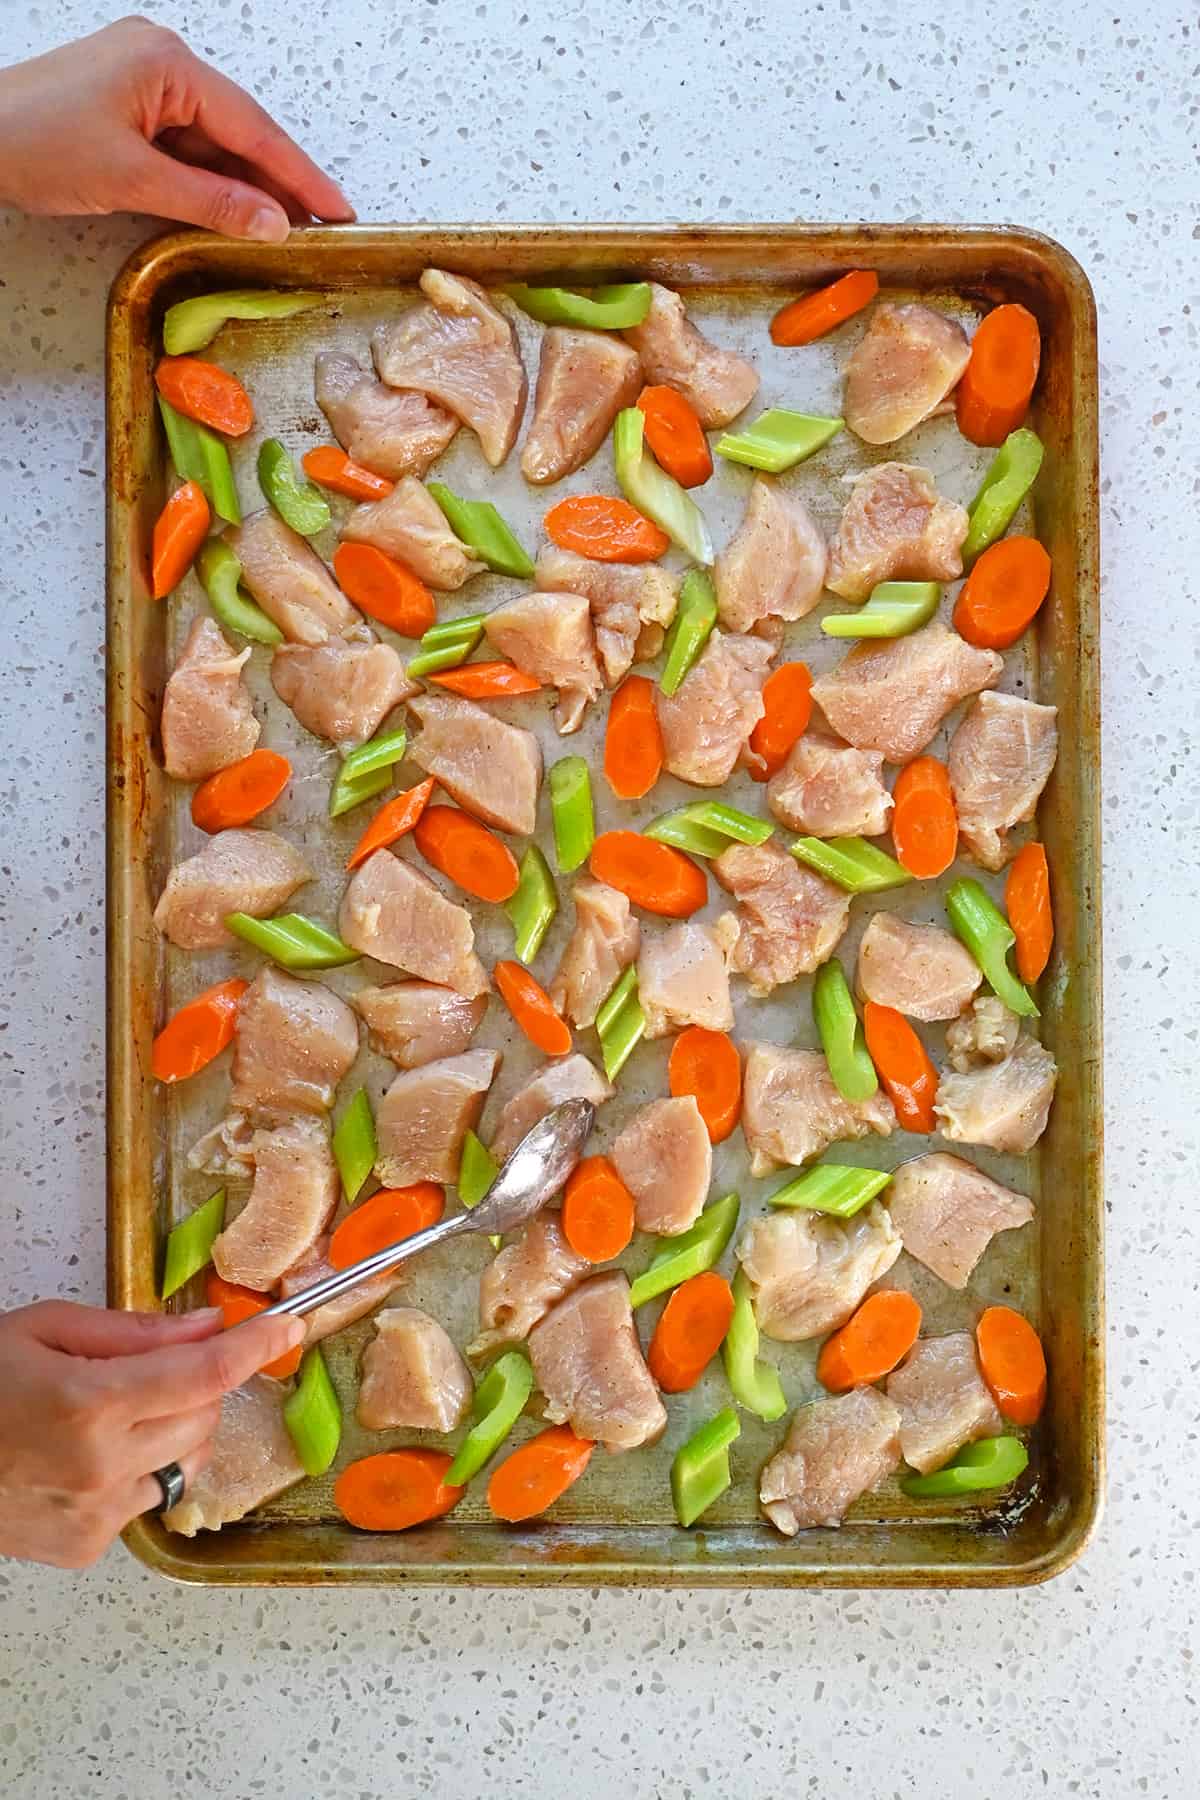 A spoon is rearranging raw chicken breast pieces, sliced carrots, and sliced celery in a single layer in a rimmed sheet pan.